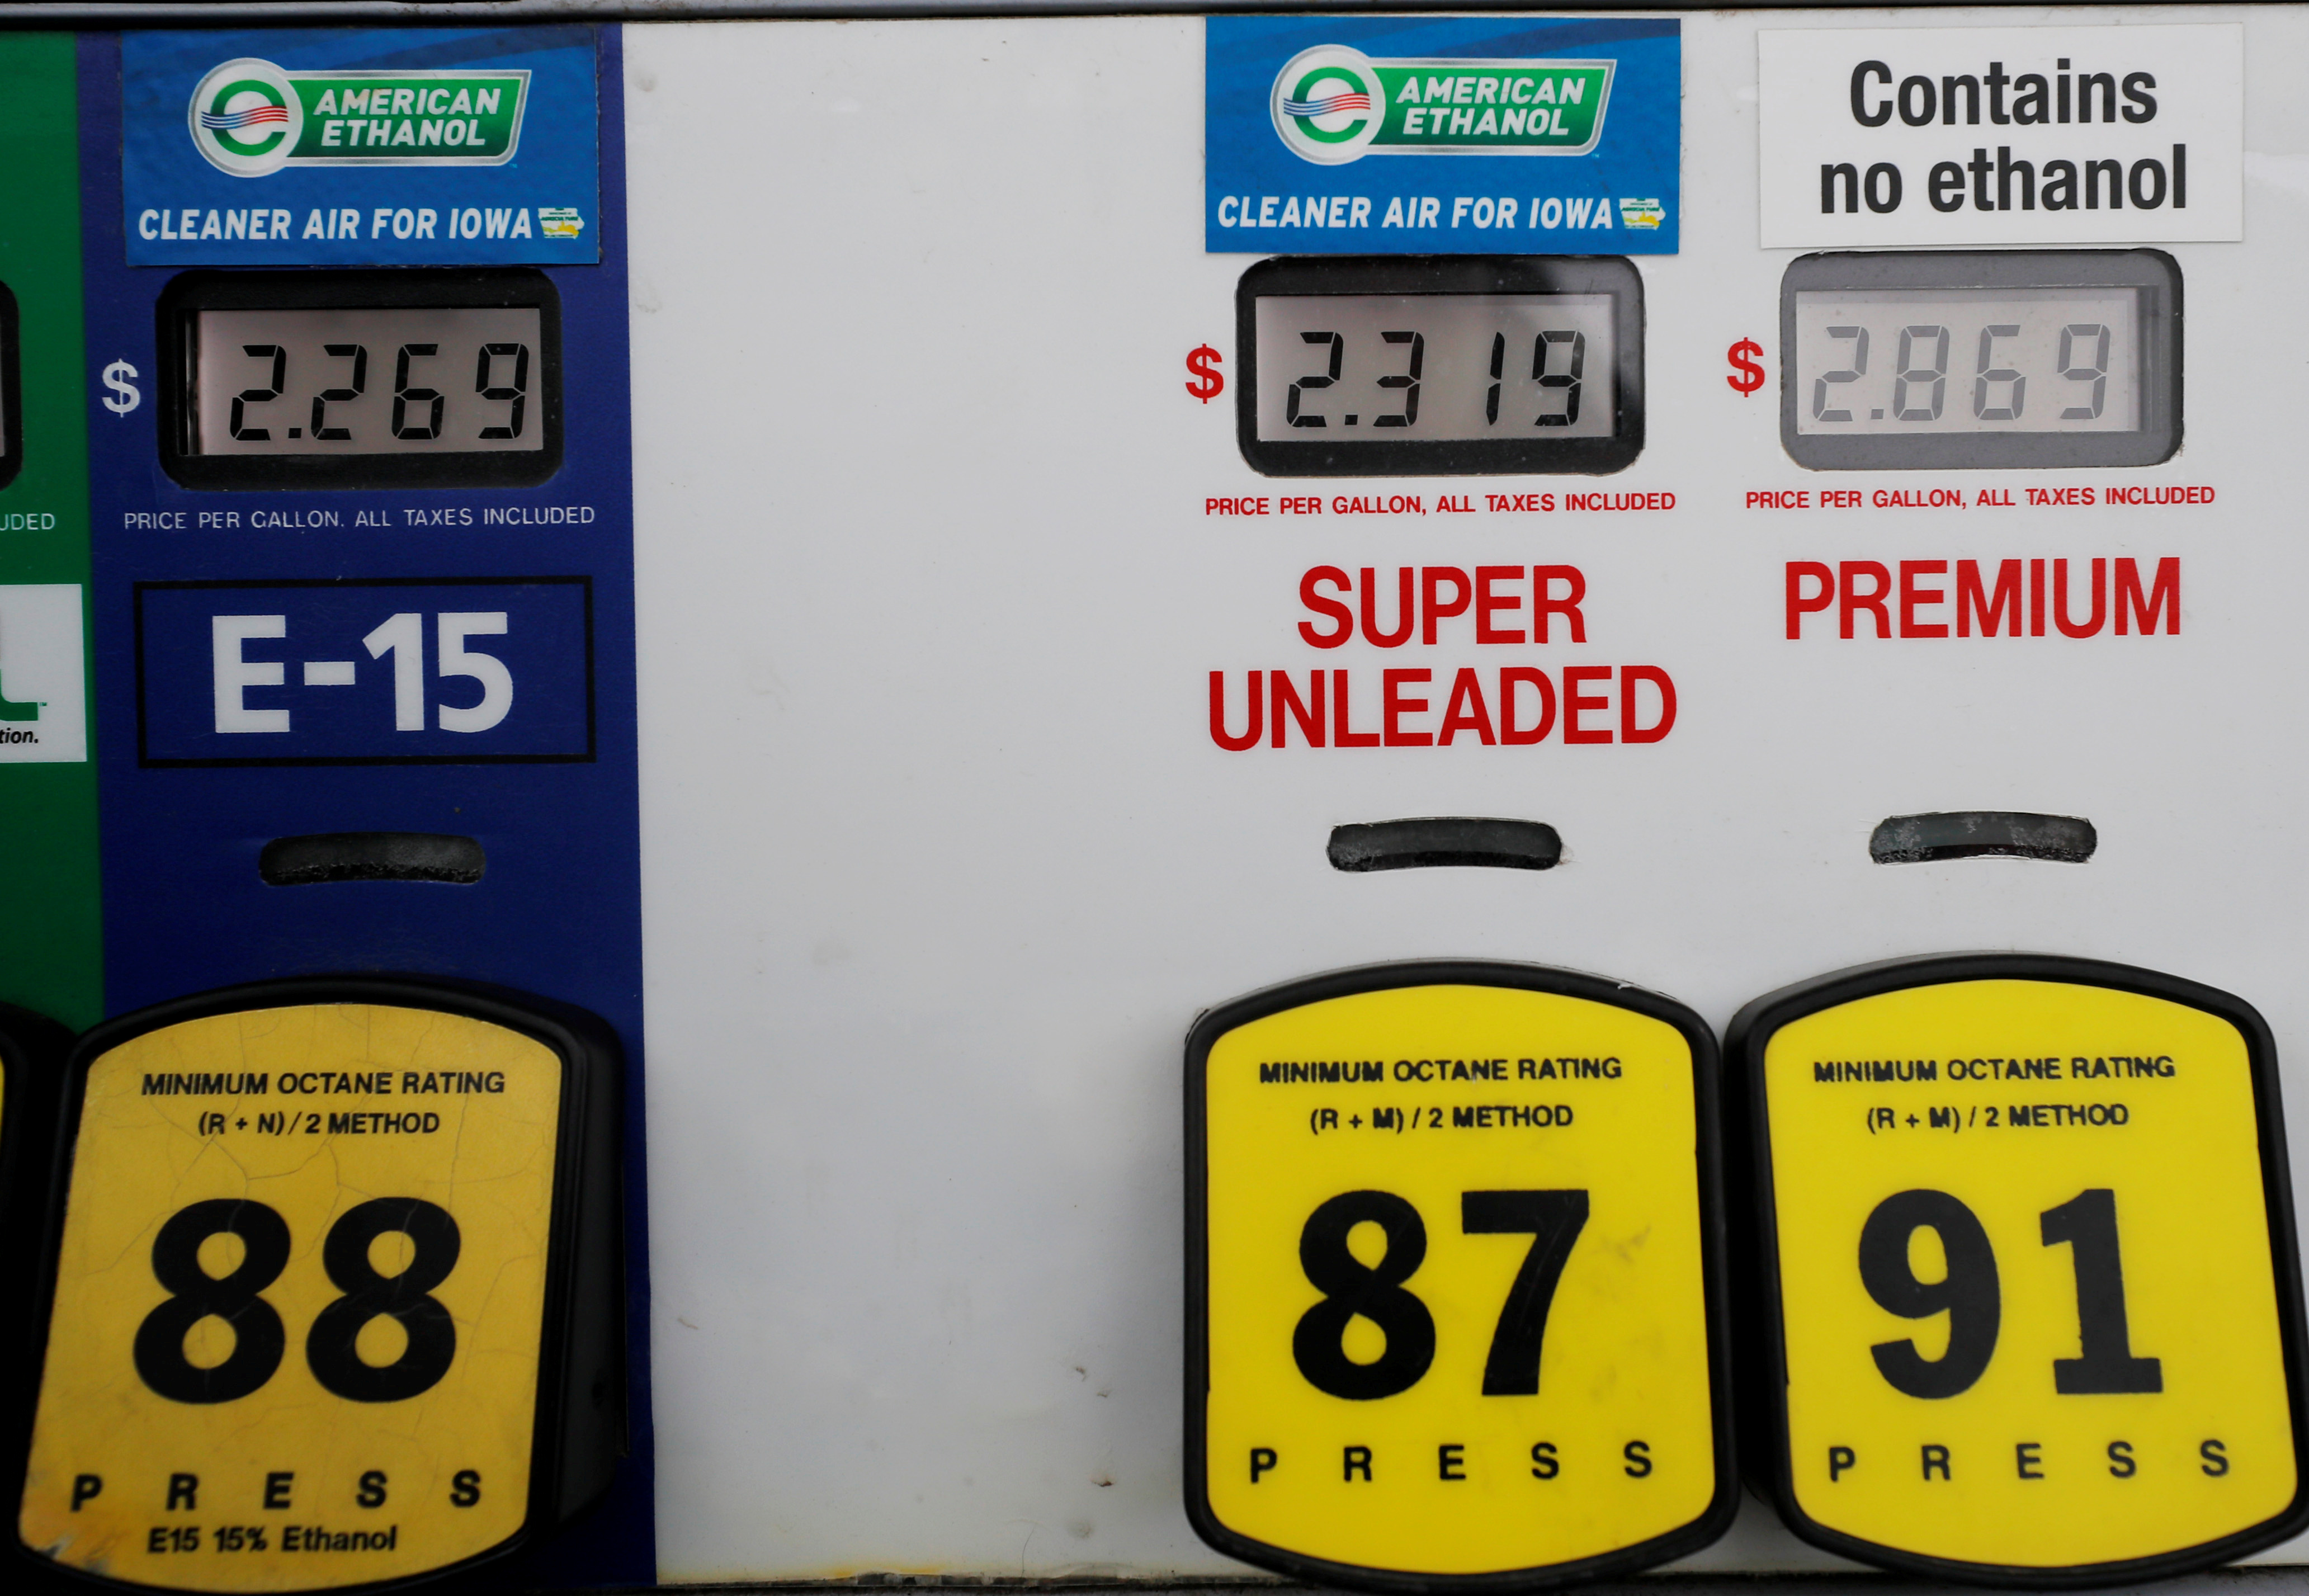 Choices at the gas pump including ethanol or no ethanol gas are seen in Des Moines